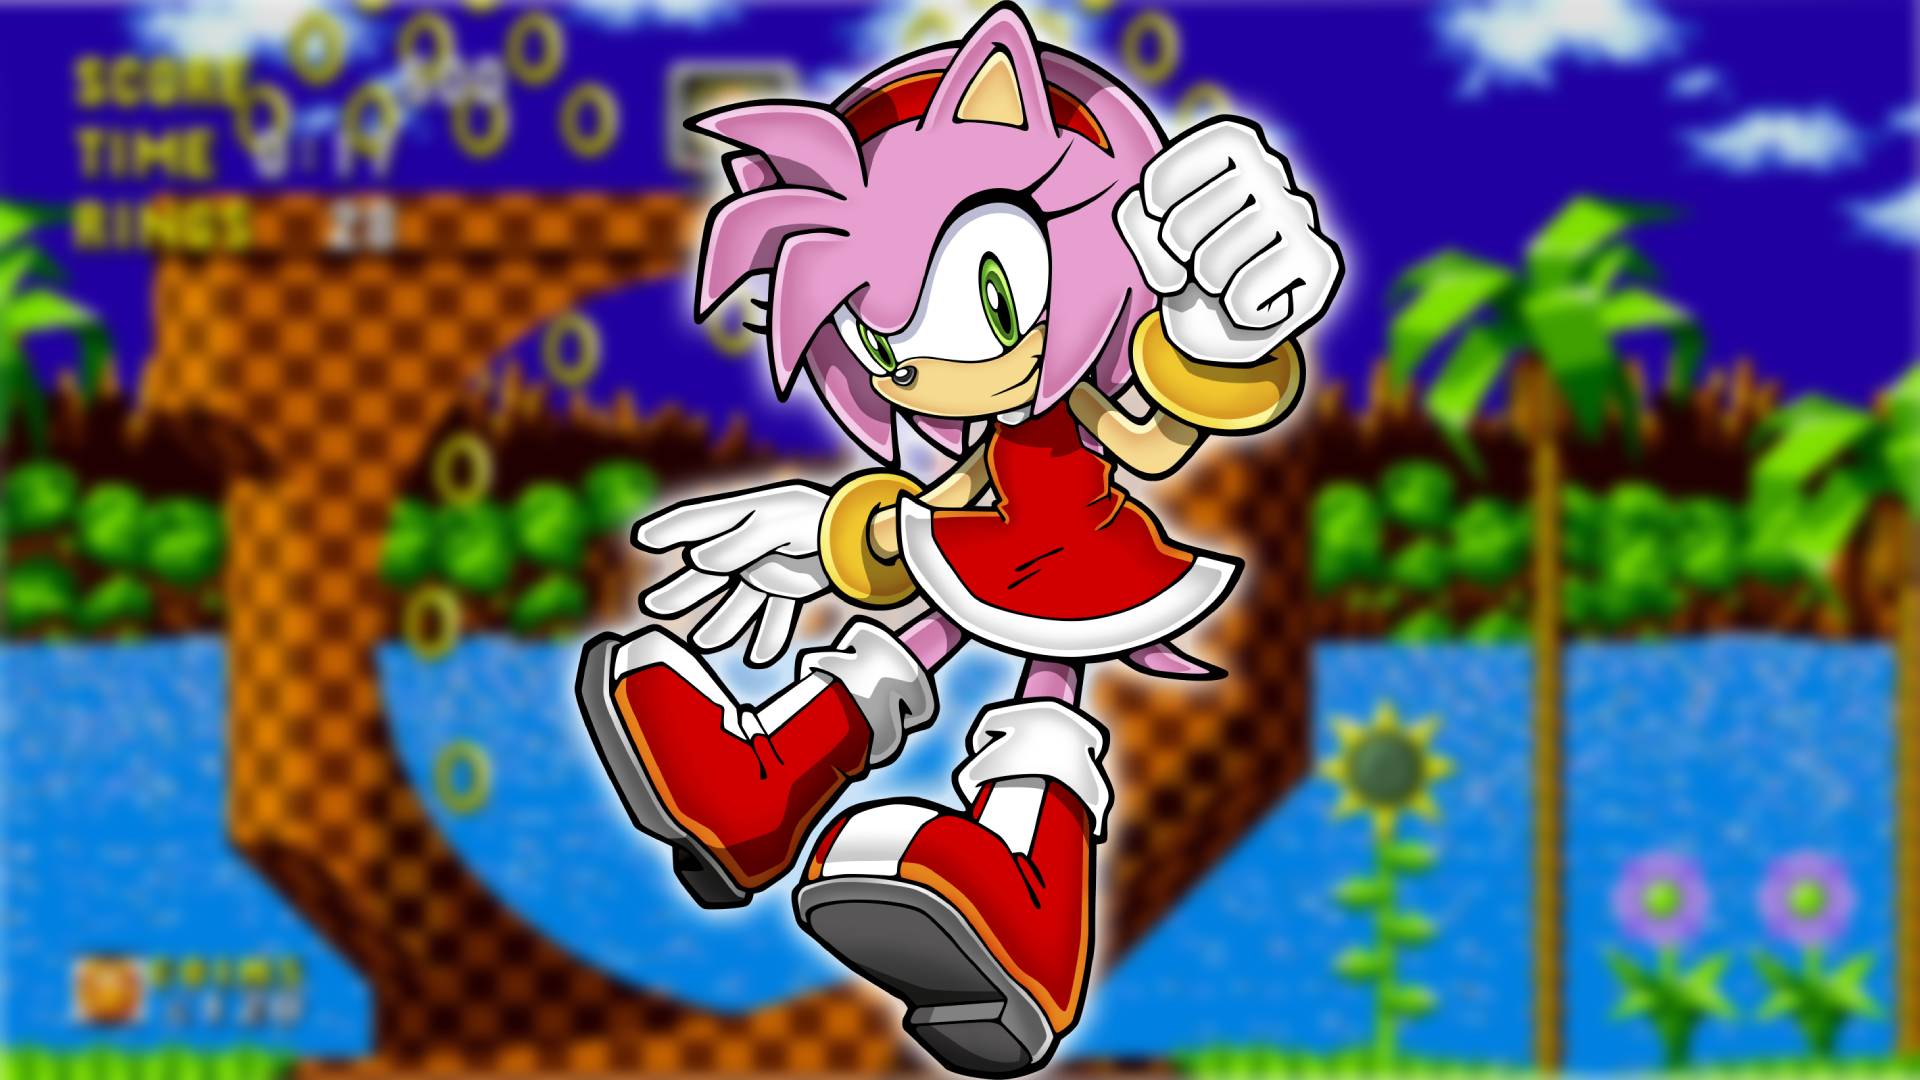 Sonic Characters: Amy Rose is visible